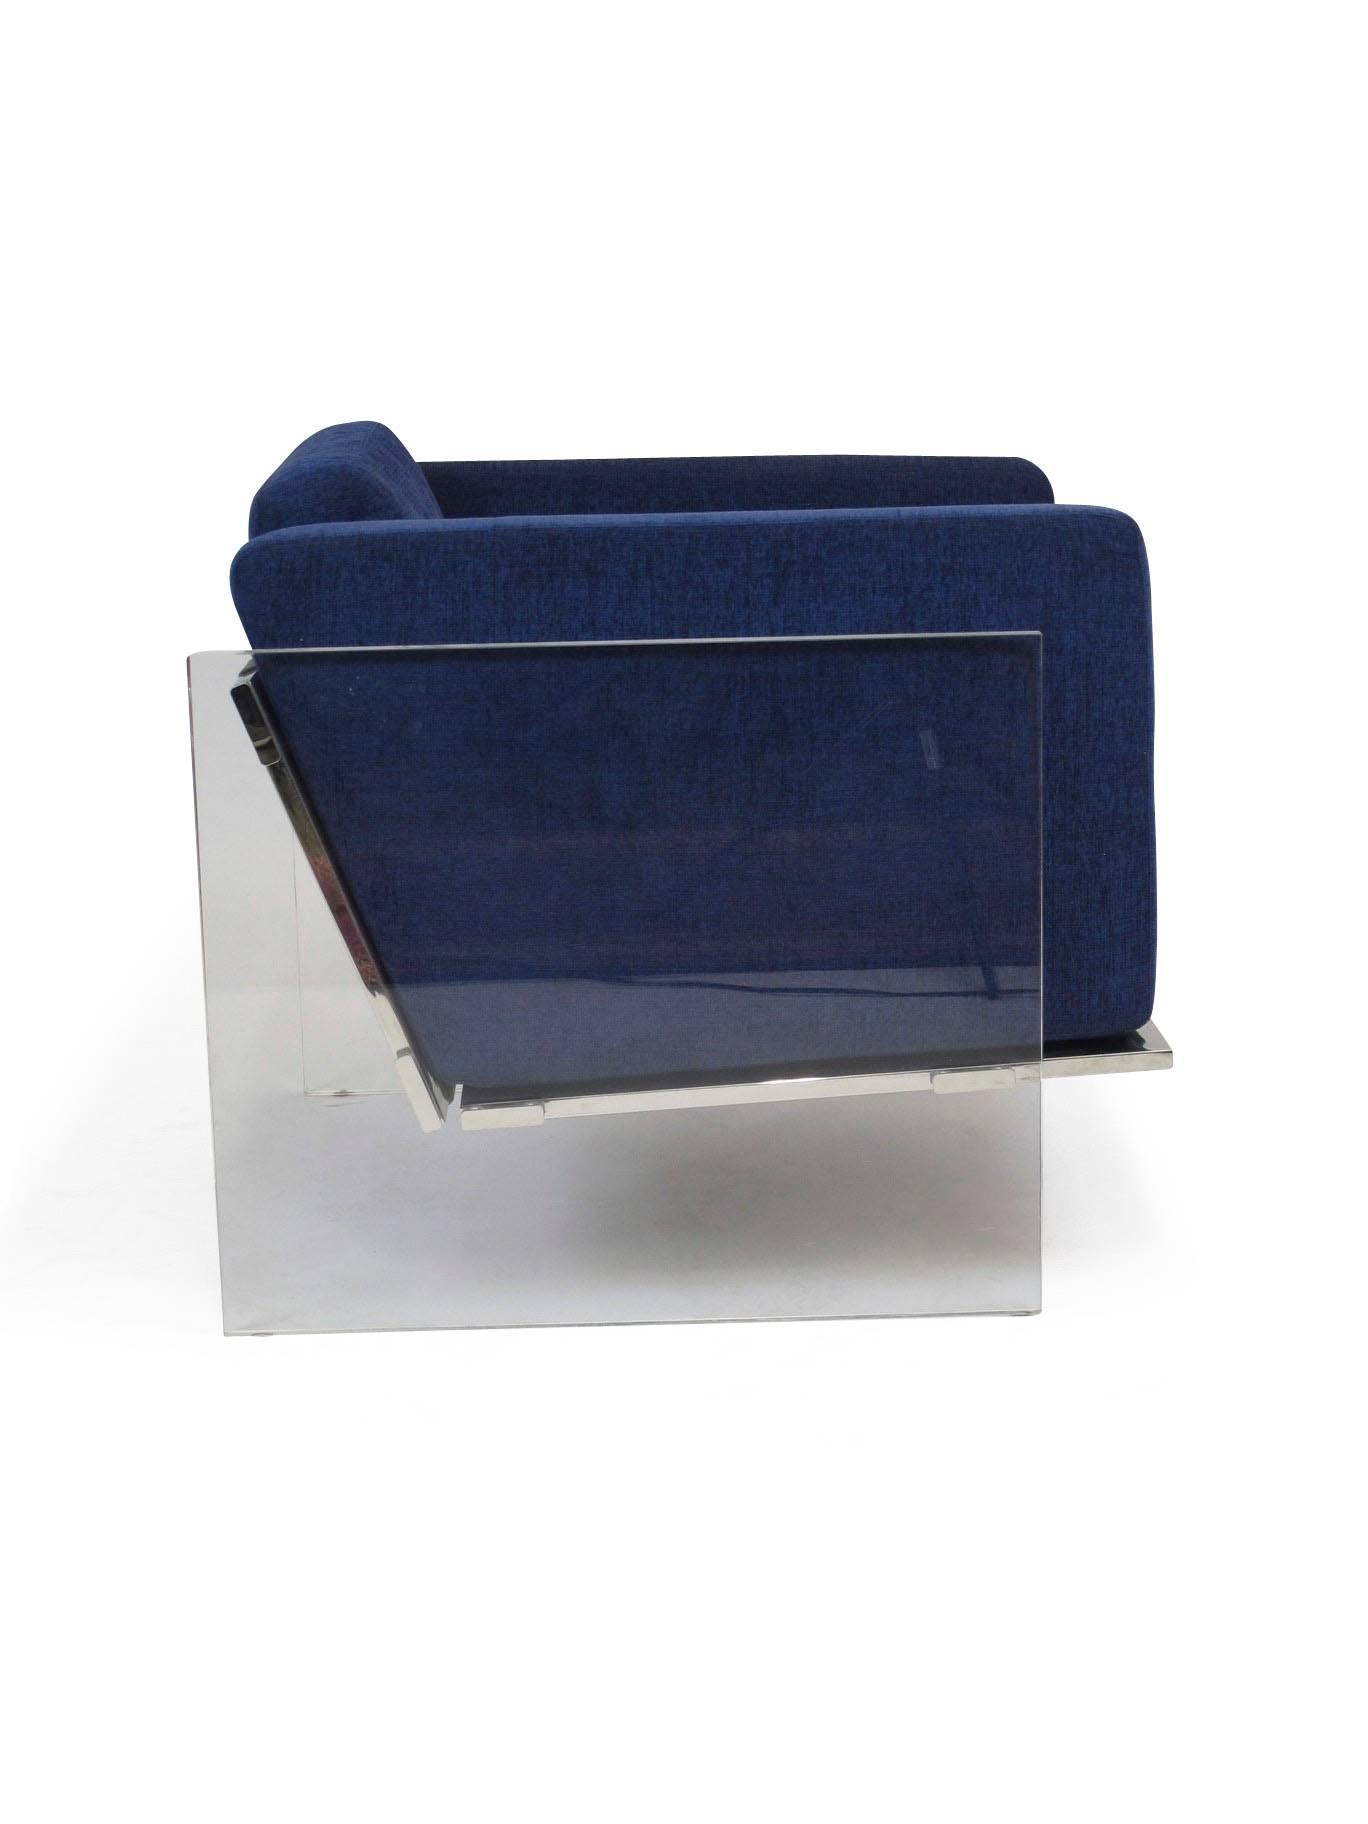 American Milo Baughman for Thayer Coggin Lucite Chrome Lounge Chair in Navy